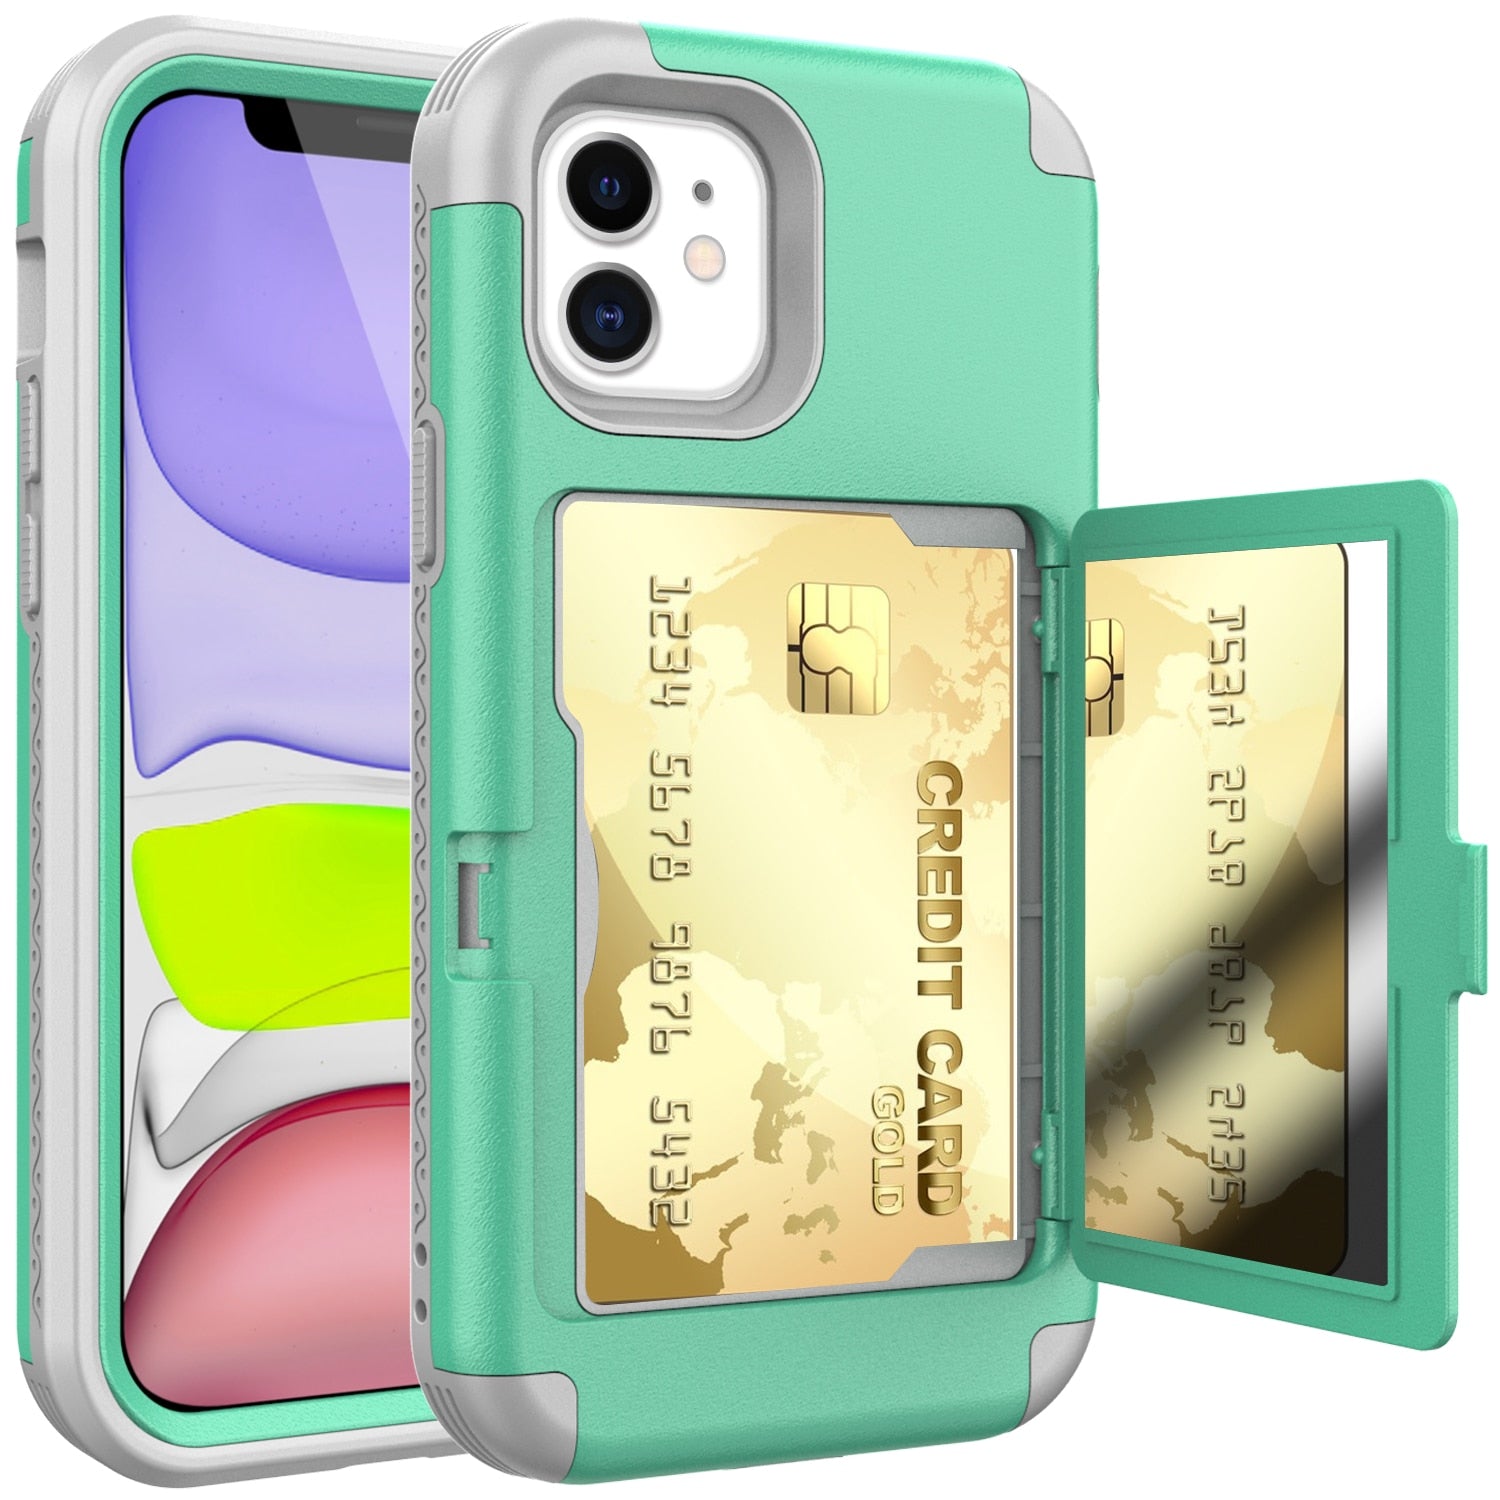 For iPhone 12 mini Pro Max Case With Wallet Card Hidden Credit Card Cover For iPhone 12 Pro Max with mirror Case for iPhone 12 - 380230 For iPhone 12 Mini / Light Green / United States Find Epic Store